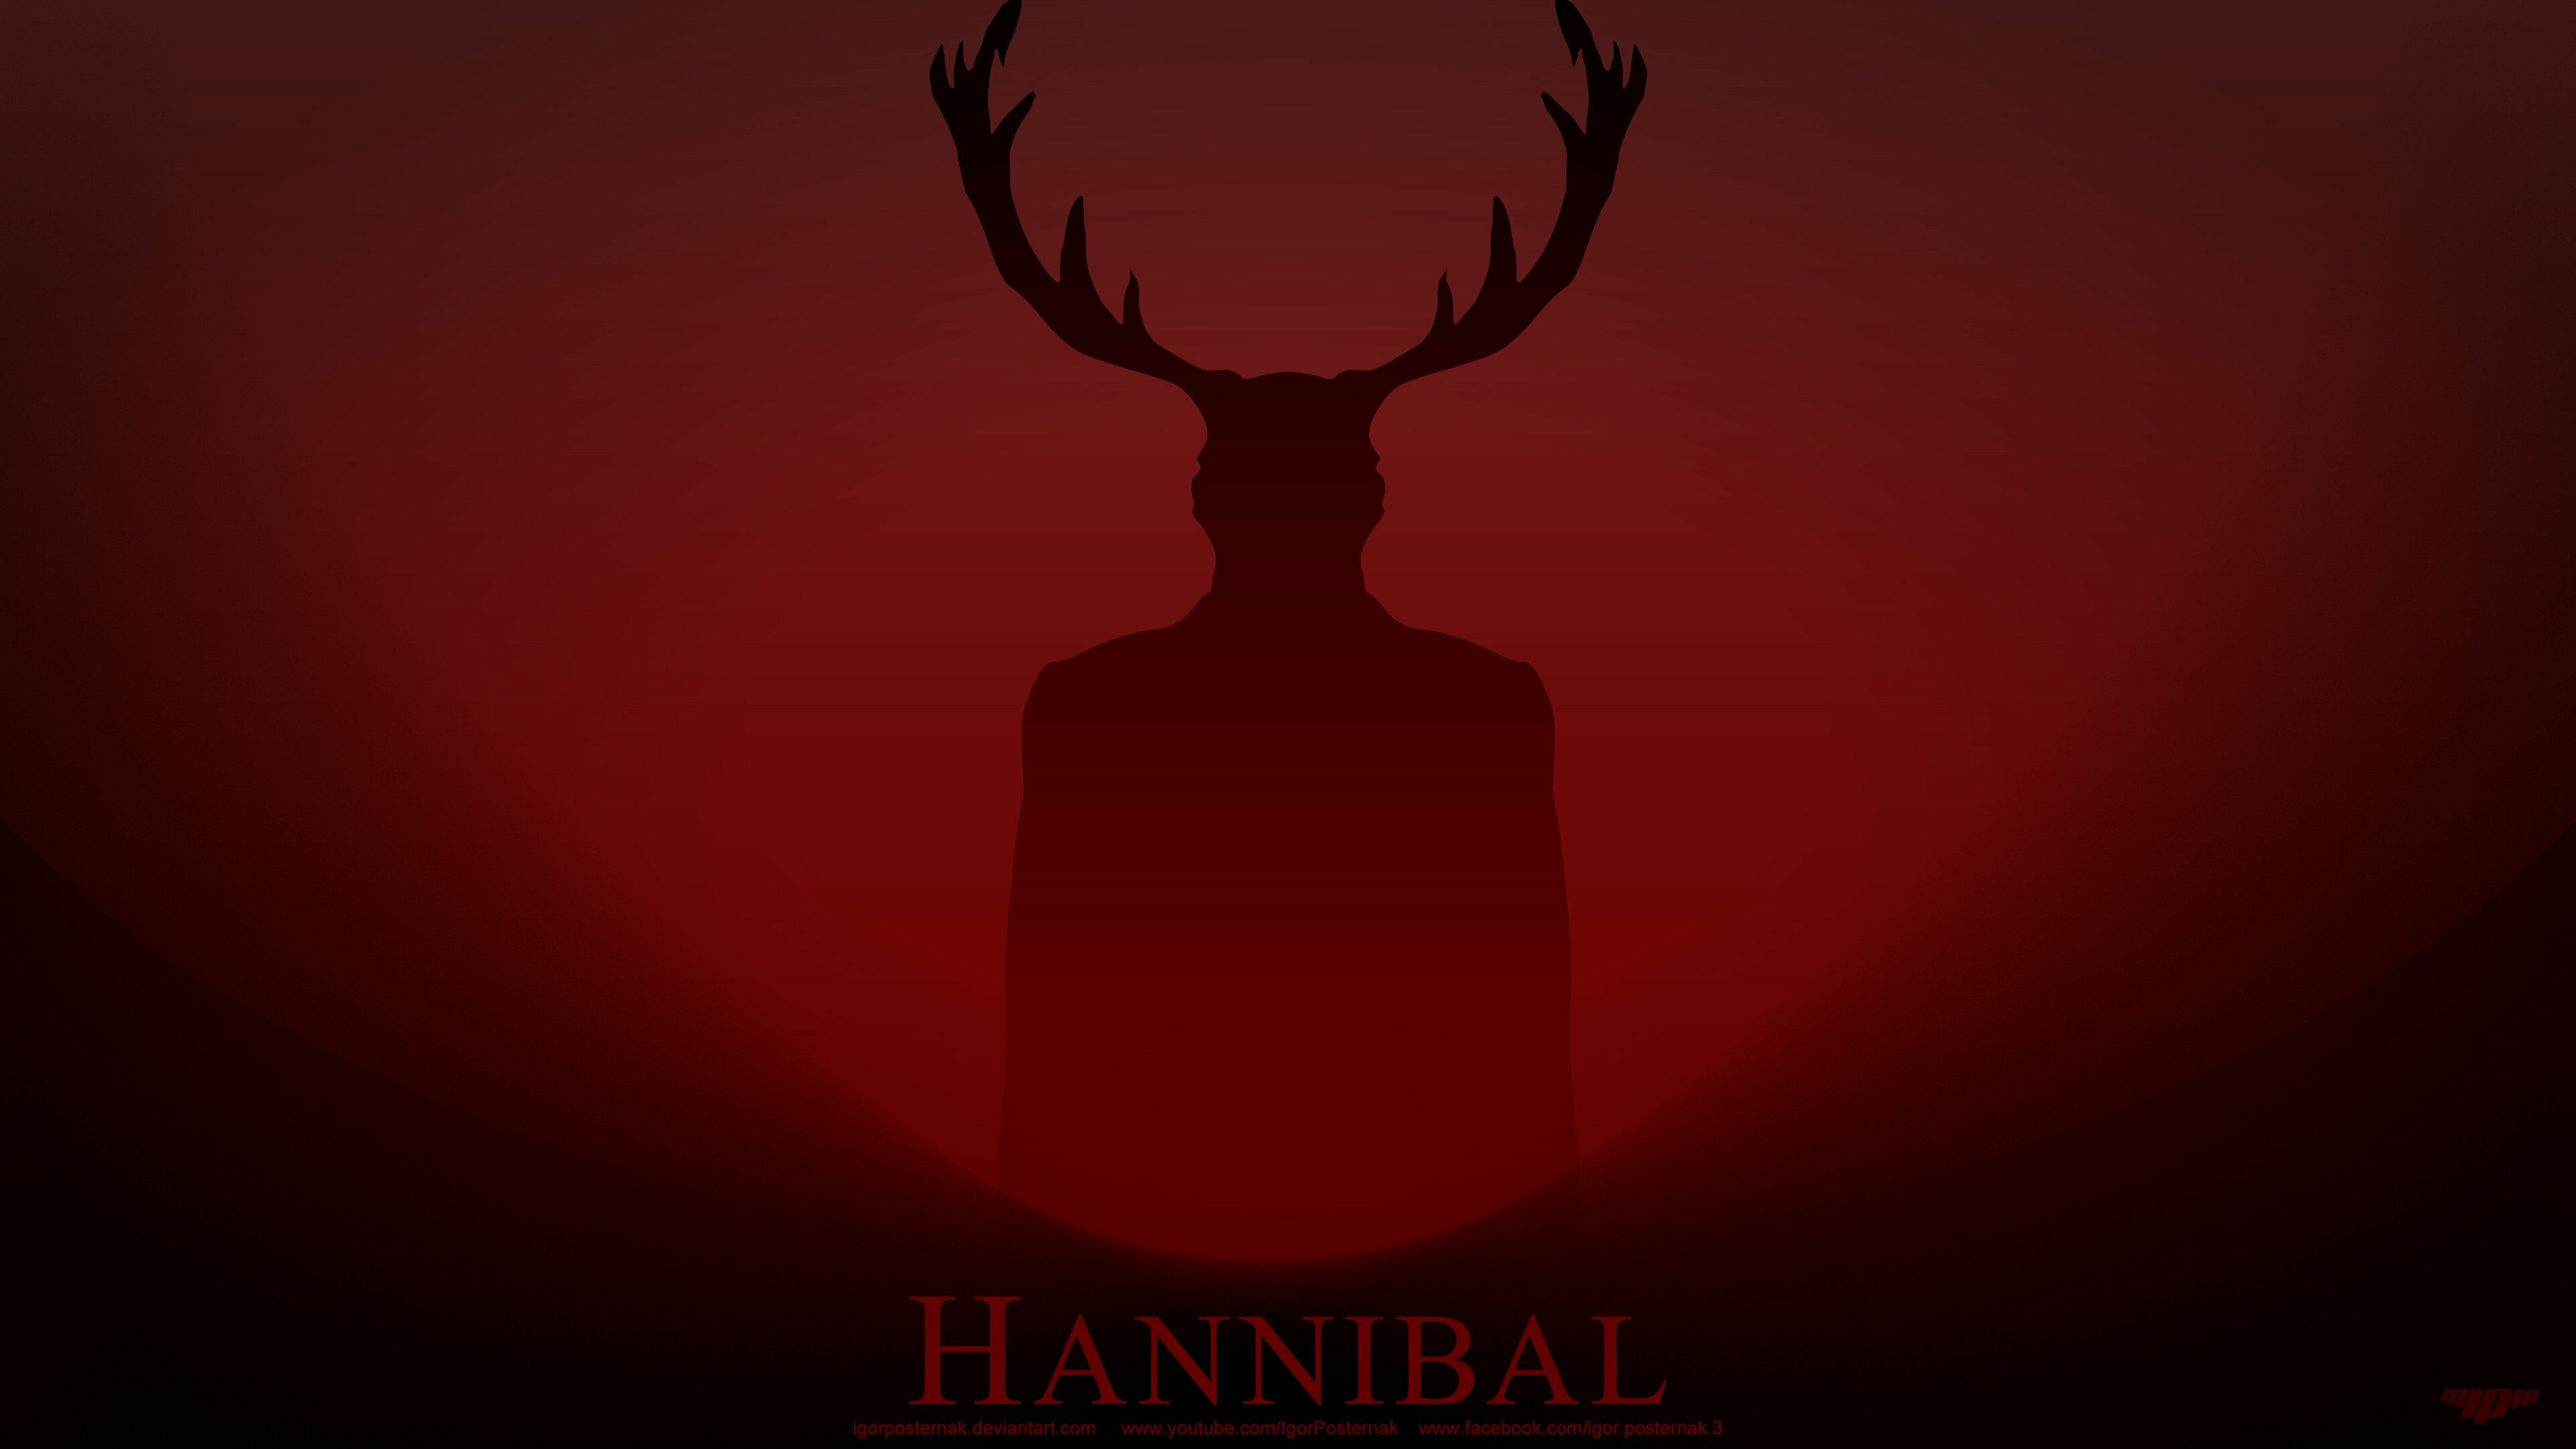 Hannibal (TV Series): An American psychological horror-thriller television an American psychological horror-thriller television series. 3840x2160 4K Background.